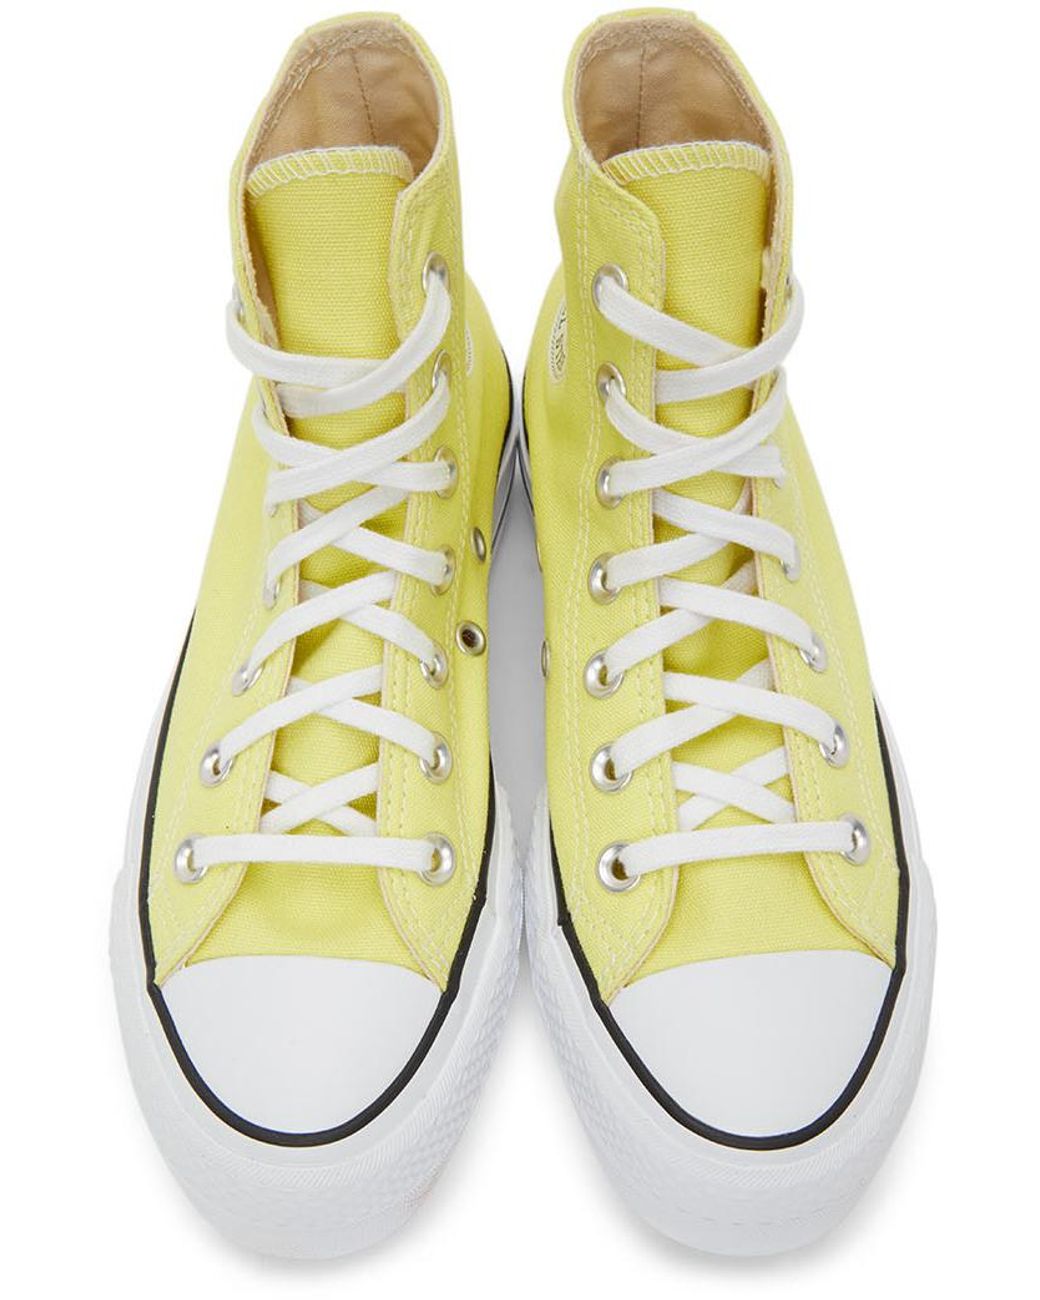 Converse Yellow Color Platform Chuck Taylor All Star Sneakers | Lyst